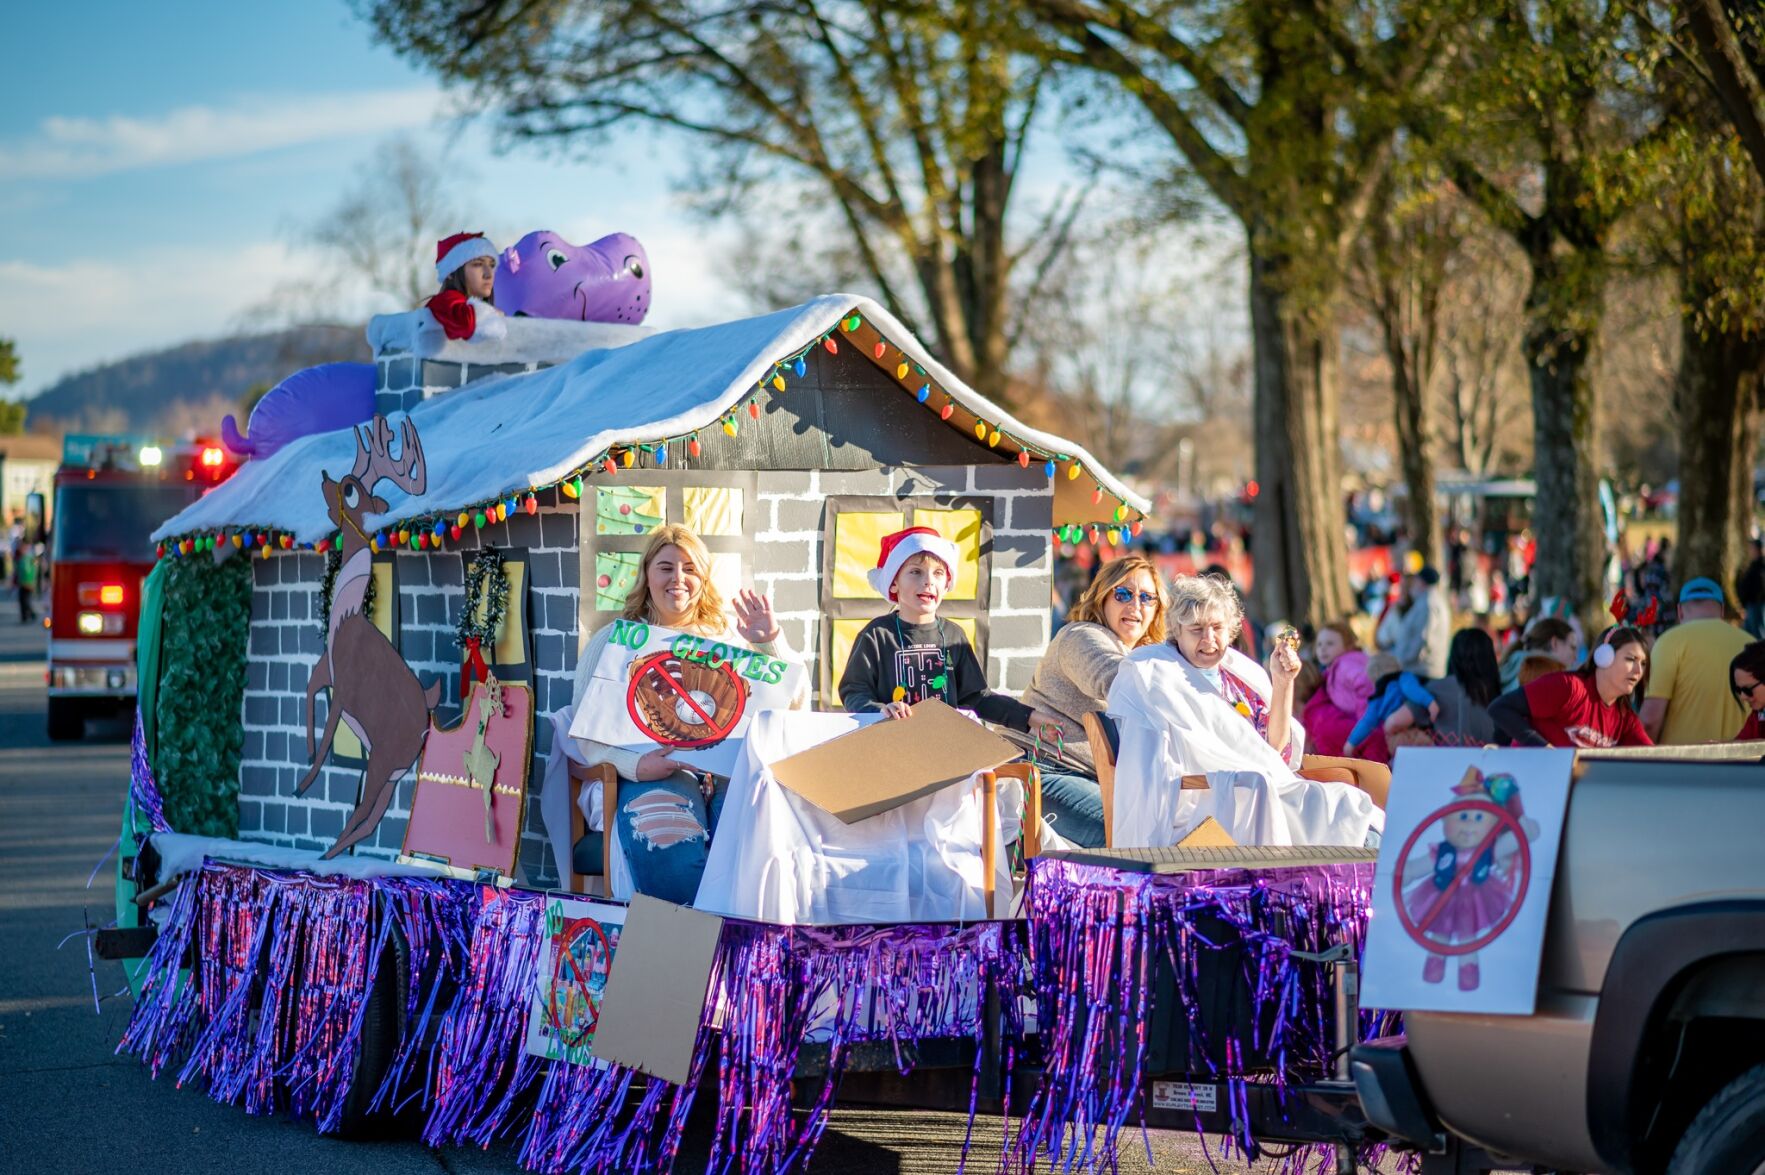 GALLERY Scenes from the J. Iverson Riddle Center Christmas Parade Part 1